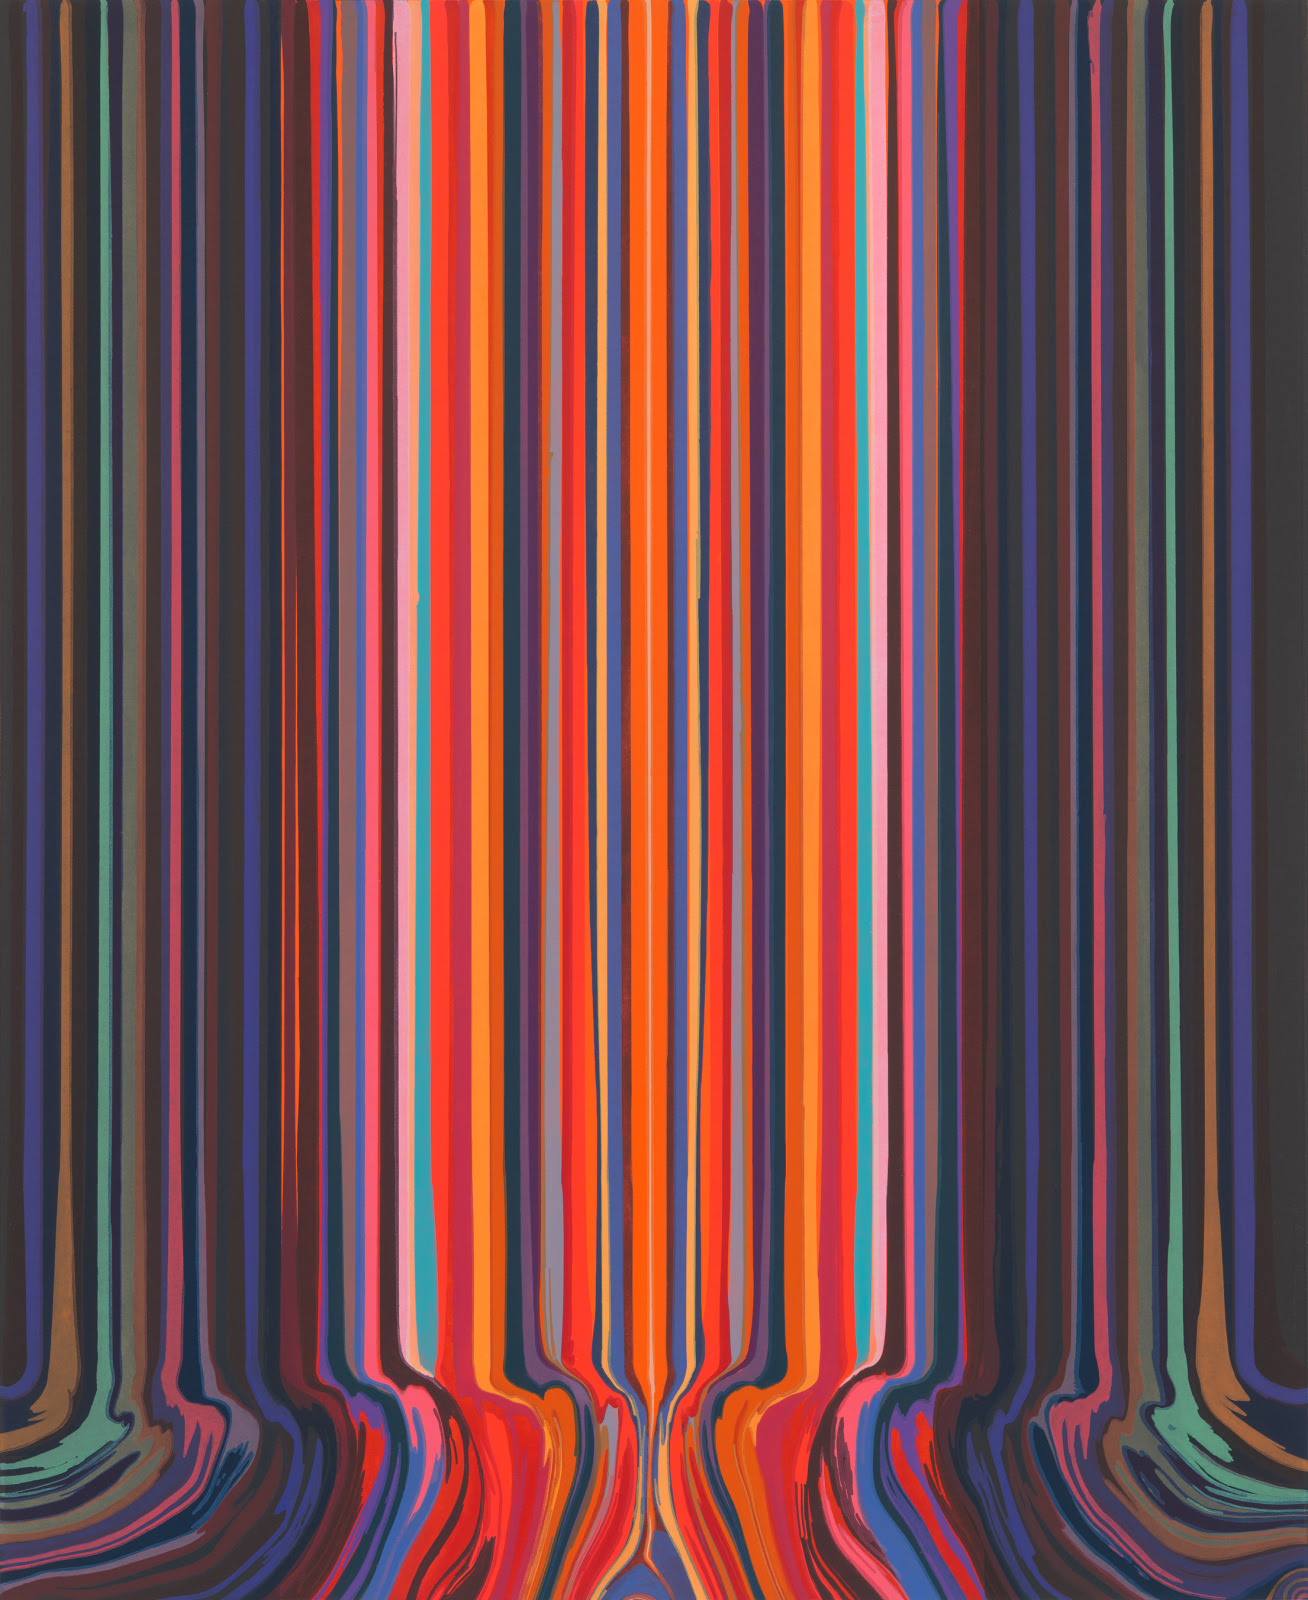 fine art print by Ian Davenport; Mirrored Red and Black Etching, 2021